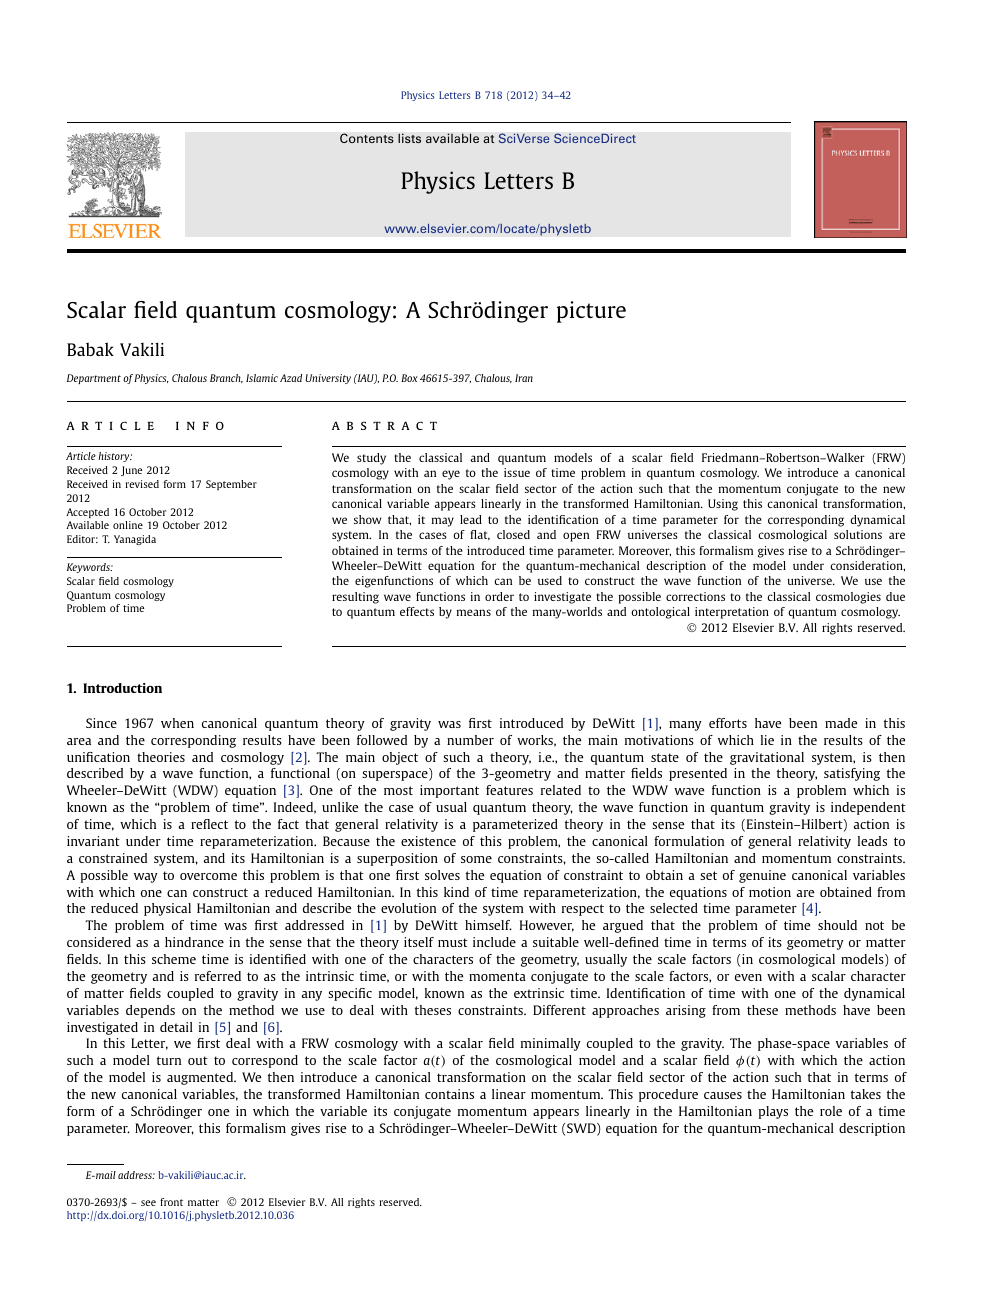 Scalar Field Quantum Cosmology A Schrodinger Picture Topic Of Research Paper In Physical Sciences Download Scholarly Article Pdf And Read For Free On Cyberleninka Open Science Hub